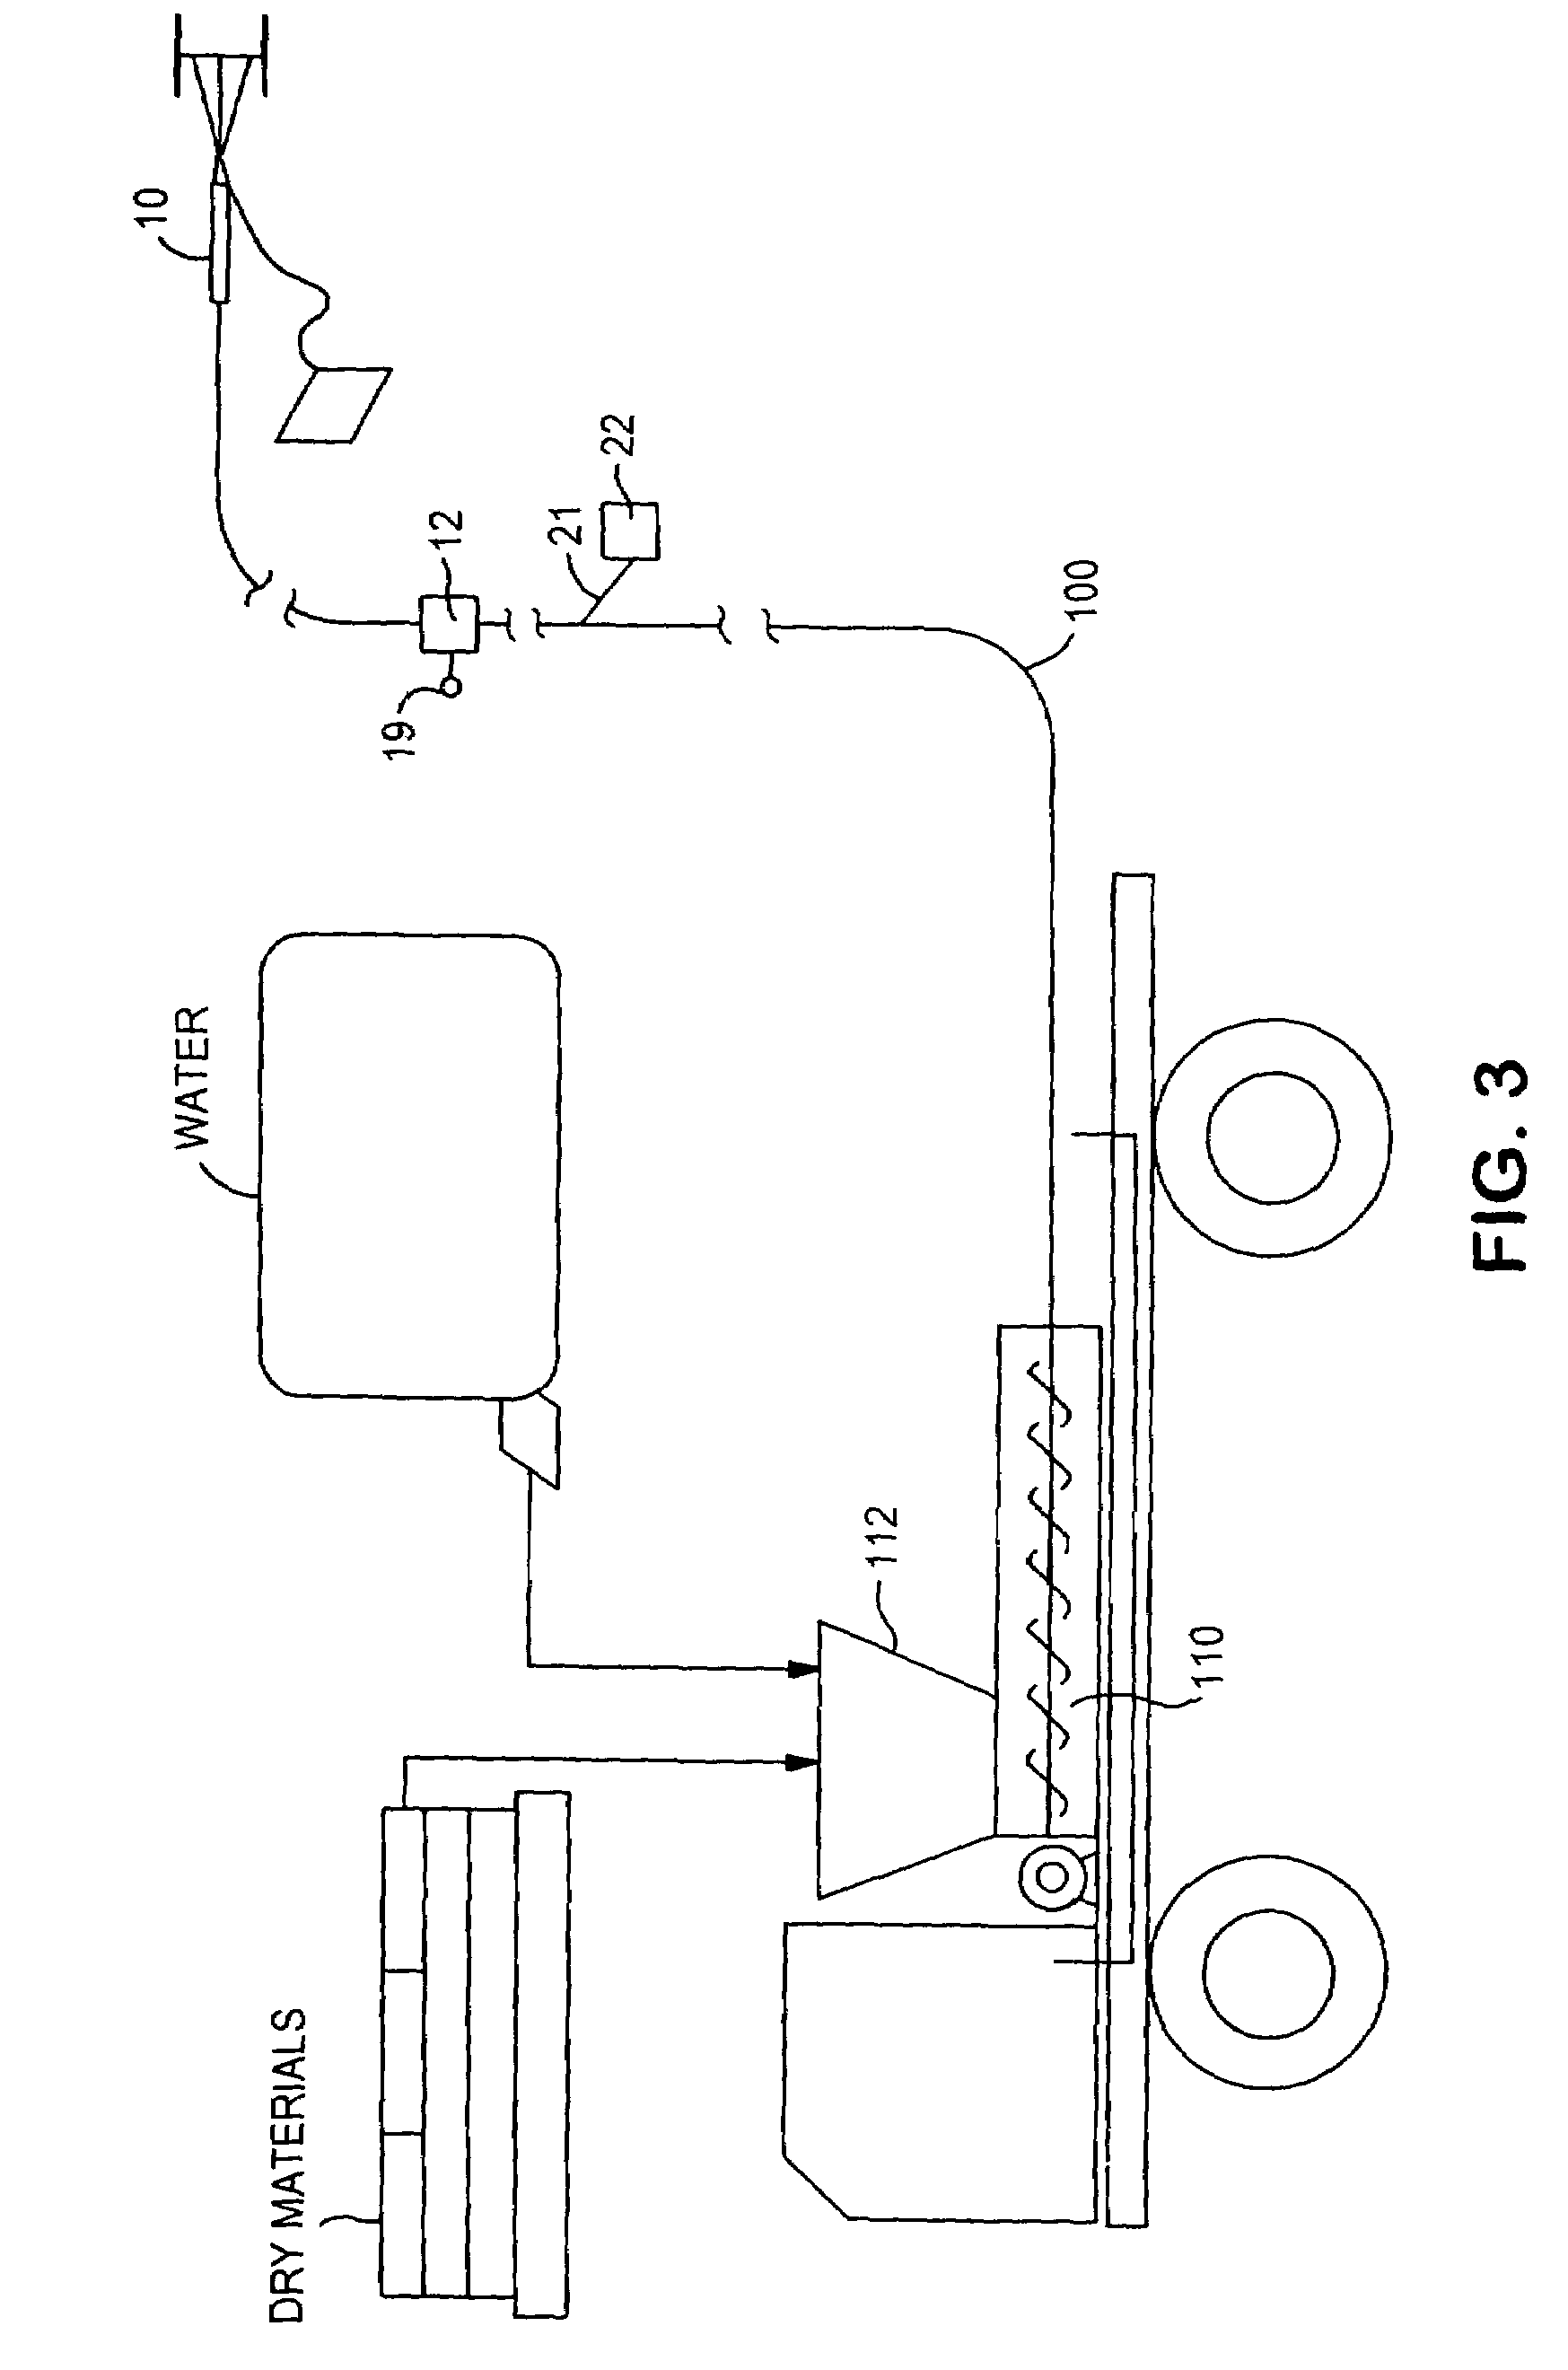 Foamed fireproofing composition and method